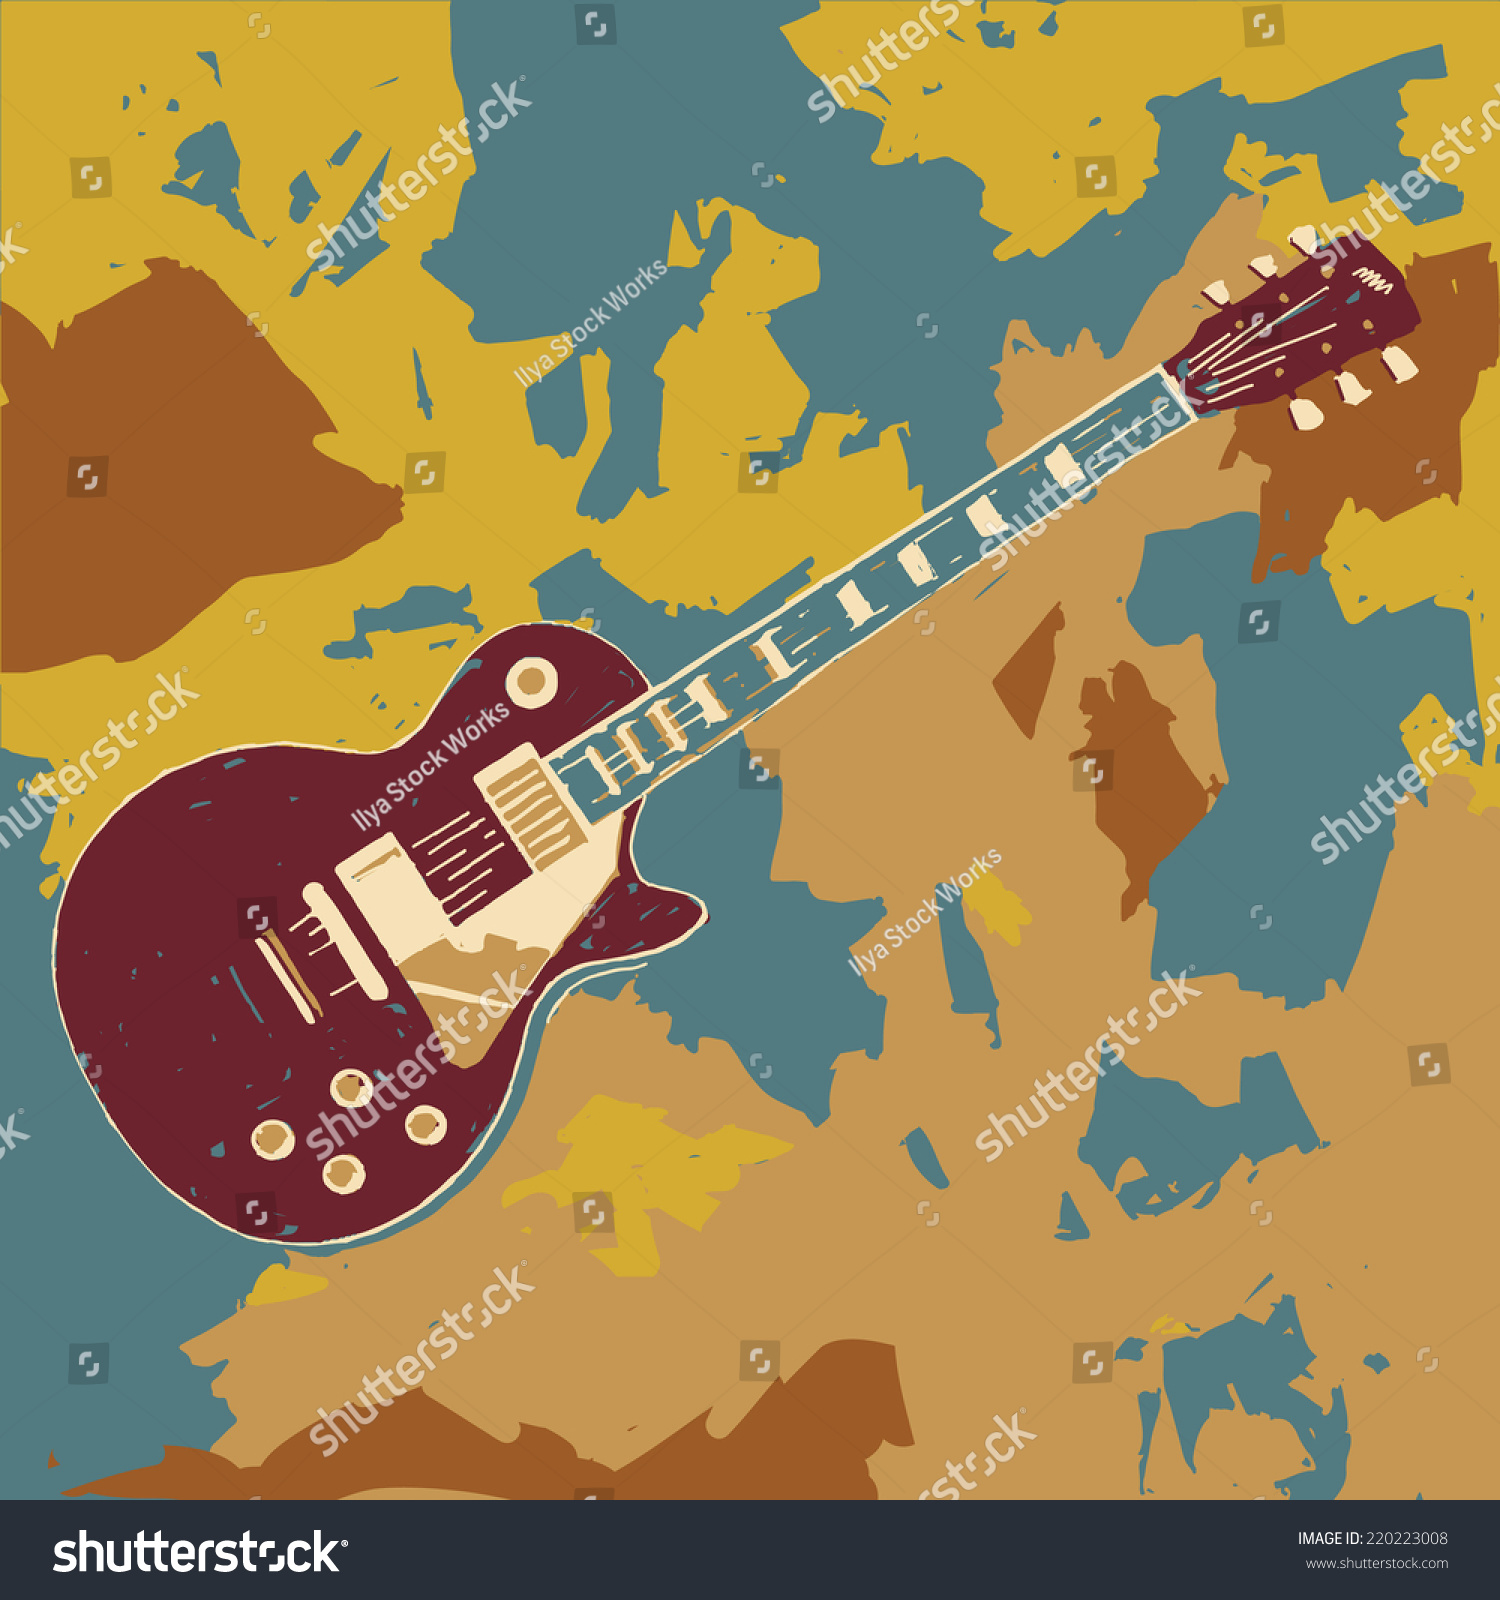 Electric Guitar Vector Graphic Illustration - 220223008 : Shutterstock